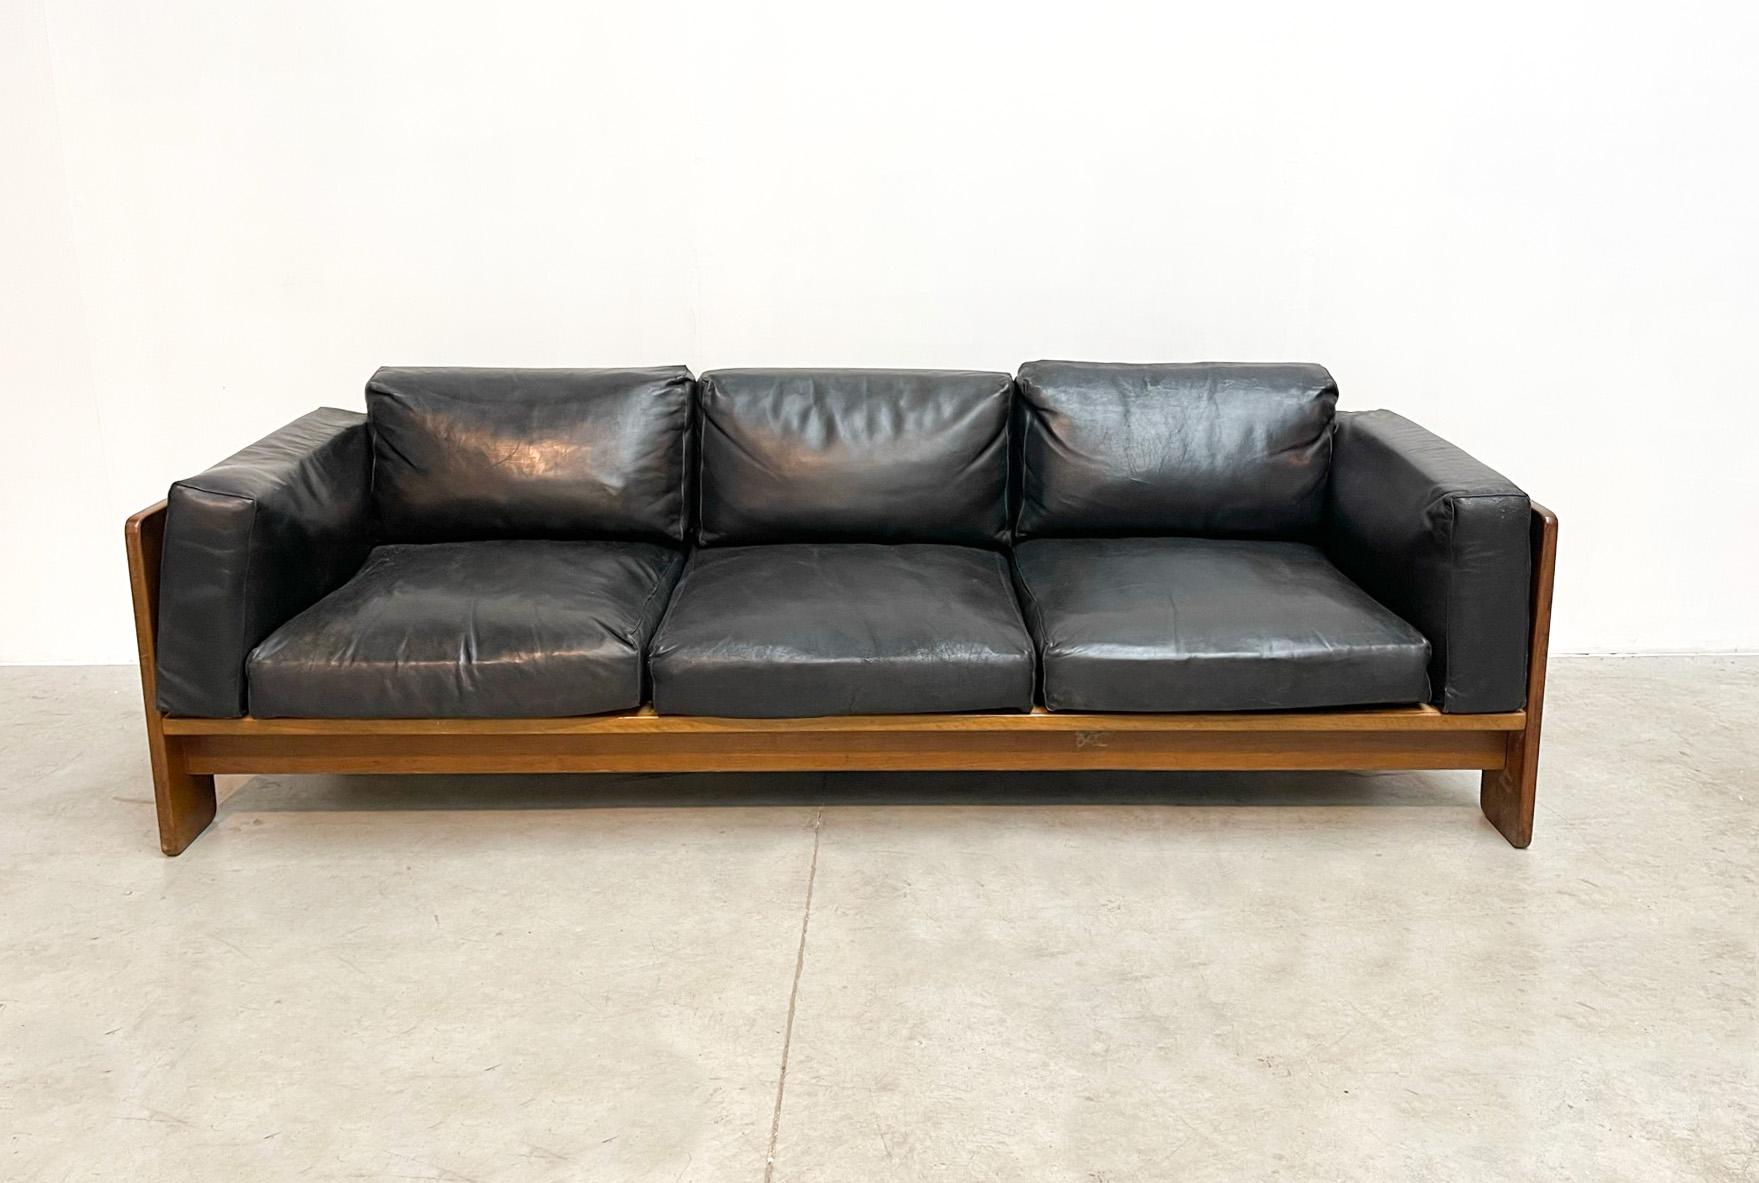 Very nice original three seater by one of the most famous designers of Italy: Tobia Scarpa. Tobia Scarpa designed this sofa for Knoll in the 60s.

 

The sofa is in good condition, has a beautiful oak frame with black leather cushion. The